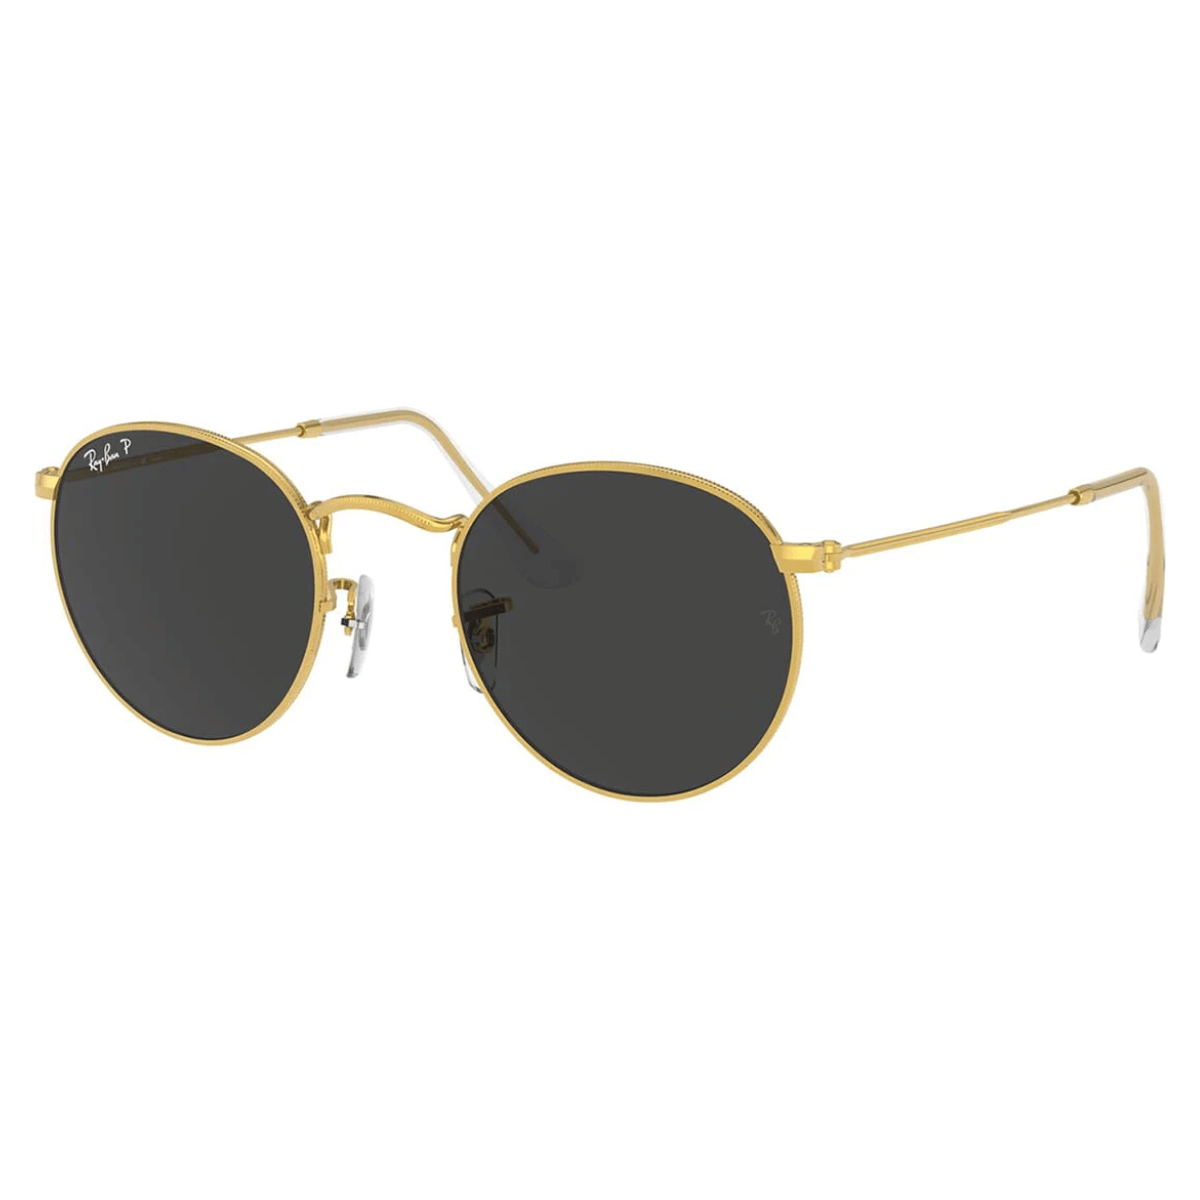 "Stylish Ray-Ban 3447 men's sunglasses in gold, showcasing premium design and craftsmanship, available at Optorium."